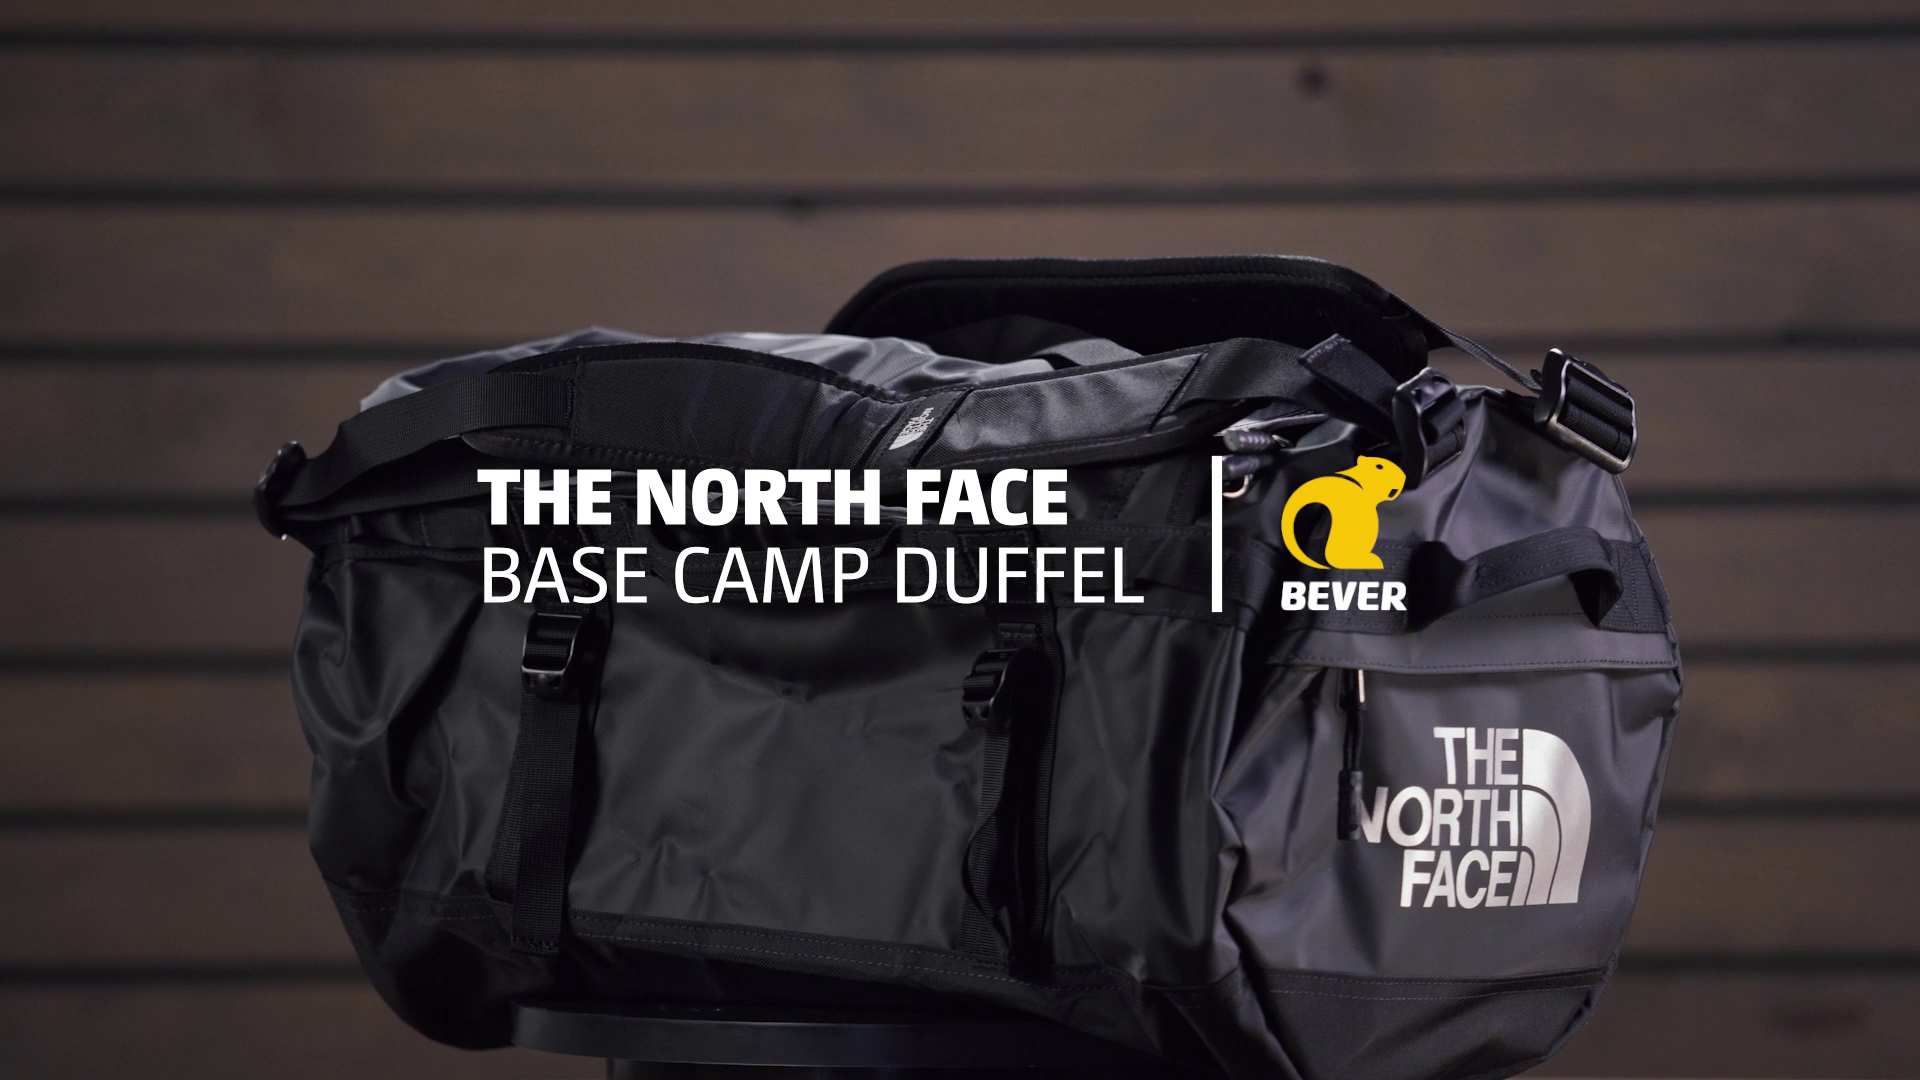 fluctueren wrijving Aankoop The North Face Base Camp Duffel | Review | Bever